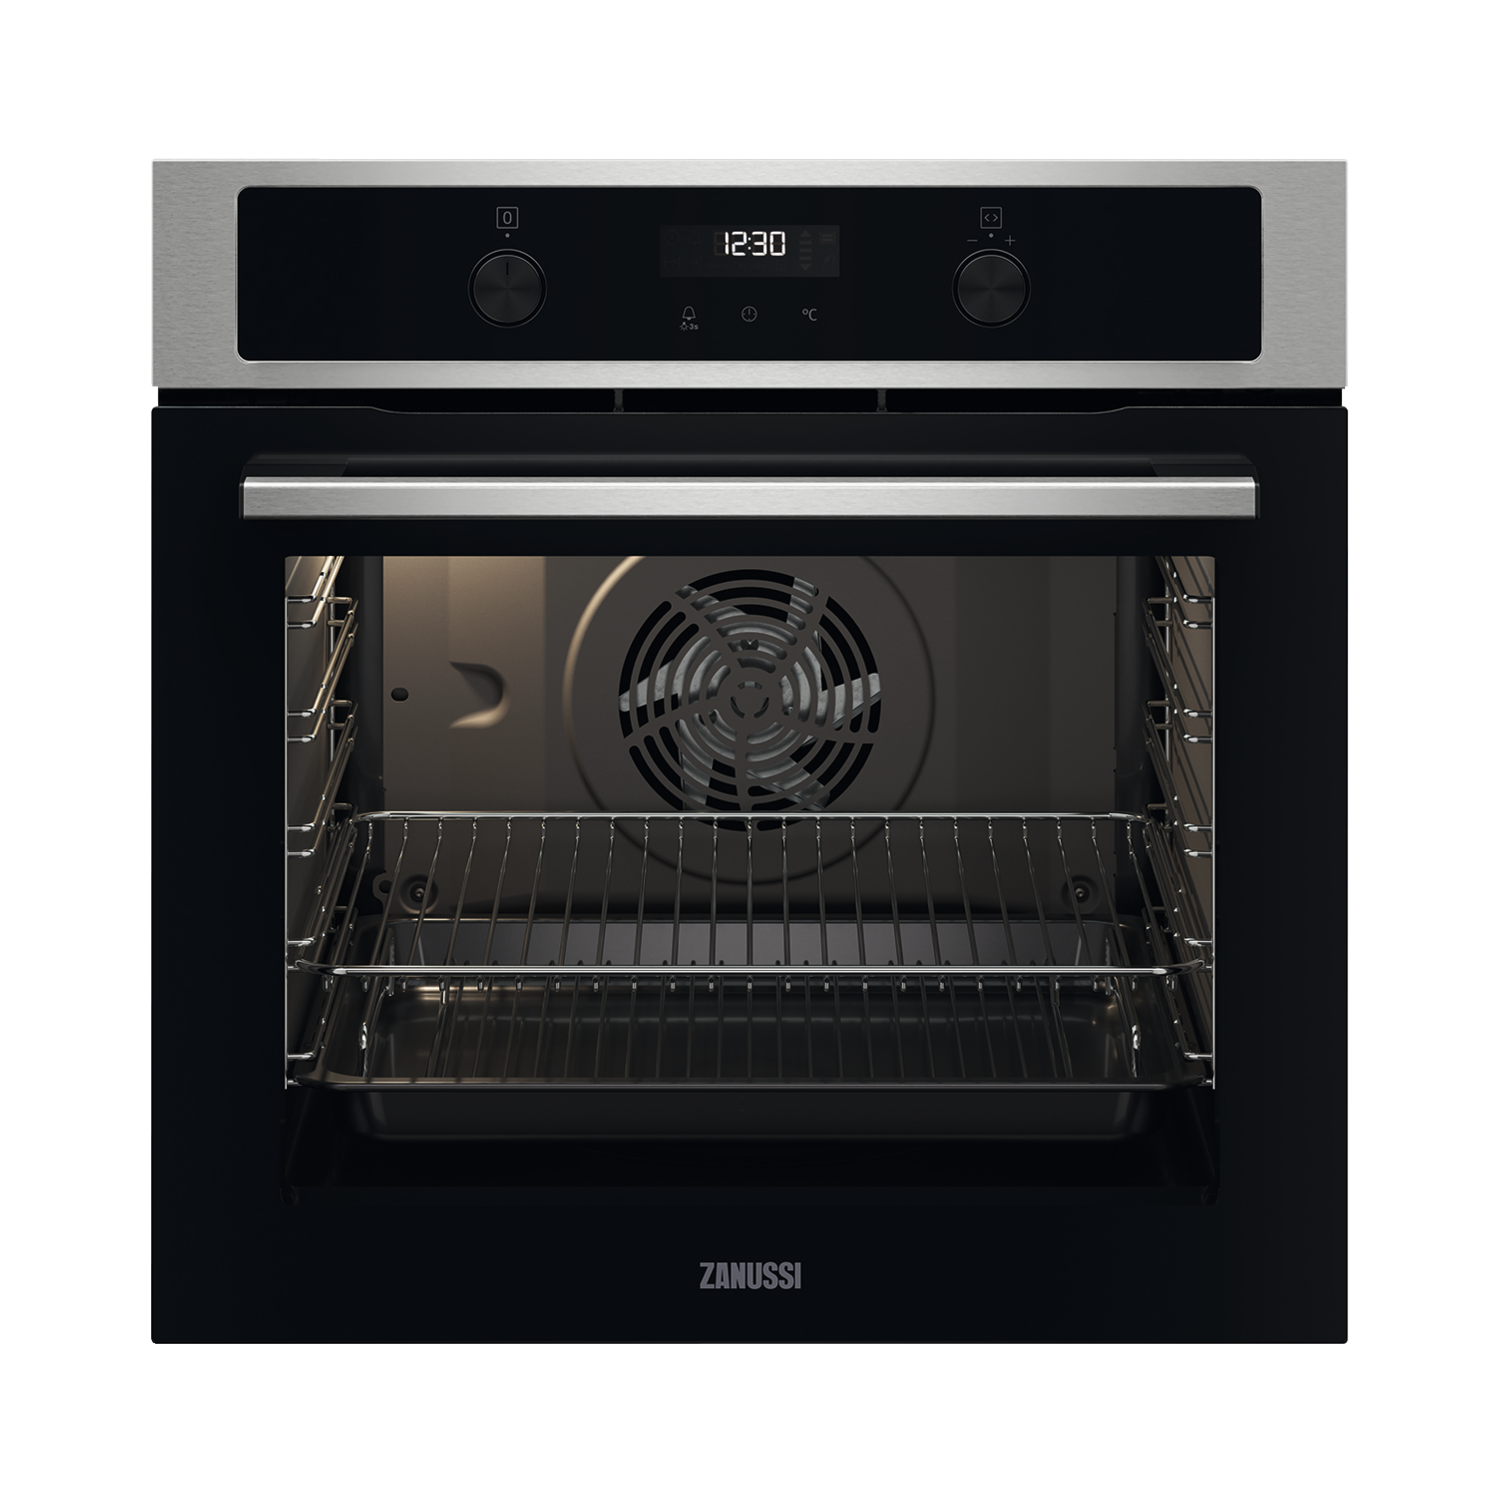 Refurbished Zanussi Series 20 ZOCND7X1 60cm Single Built In Electric Oven Stainless Steel